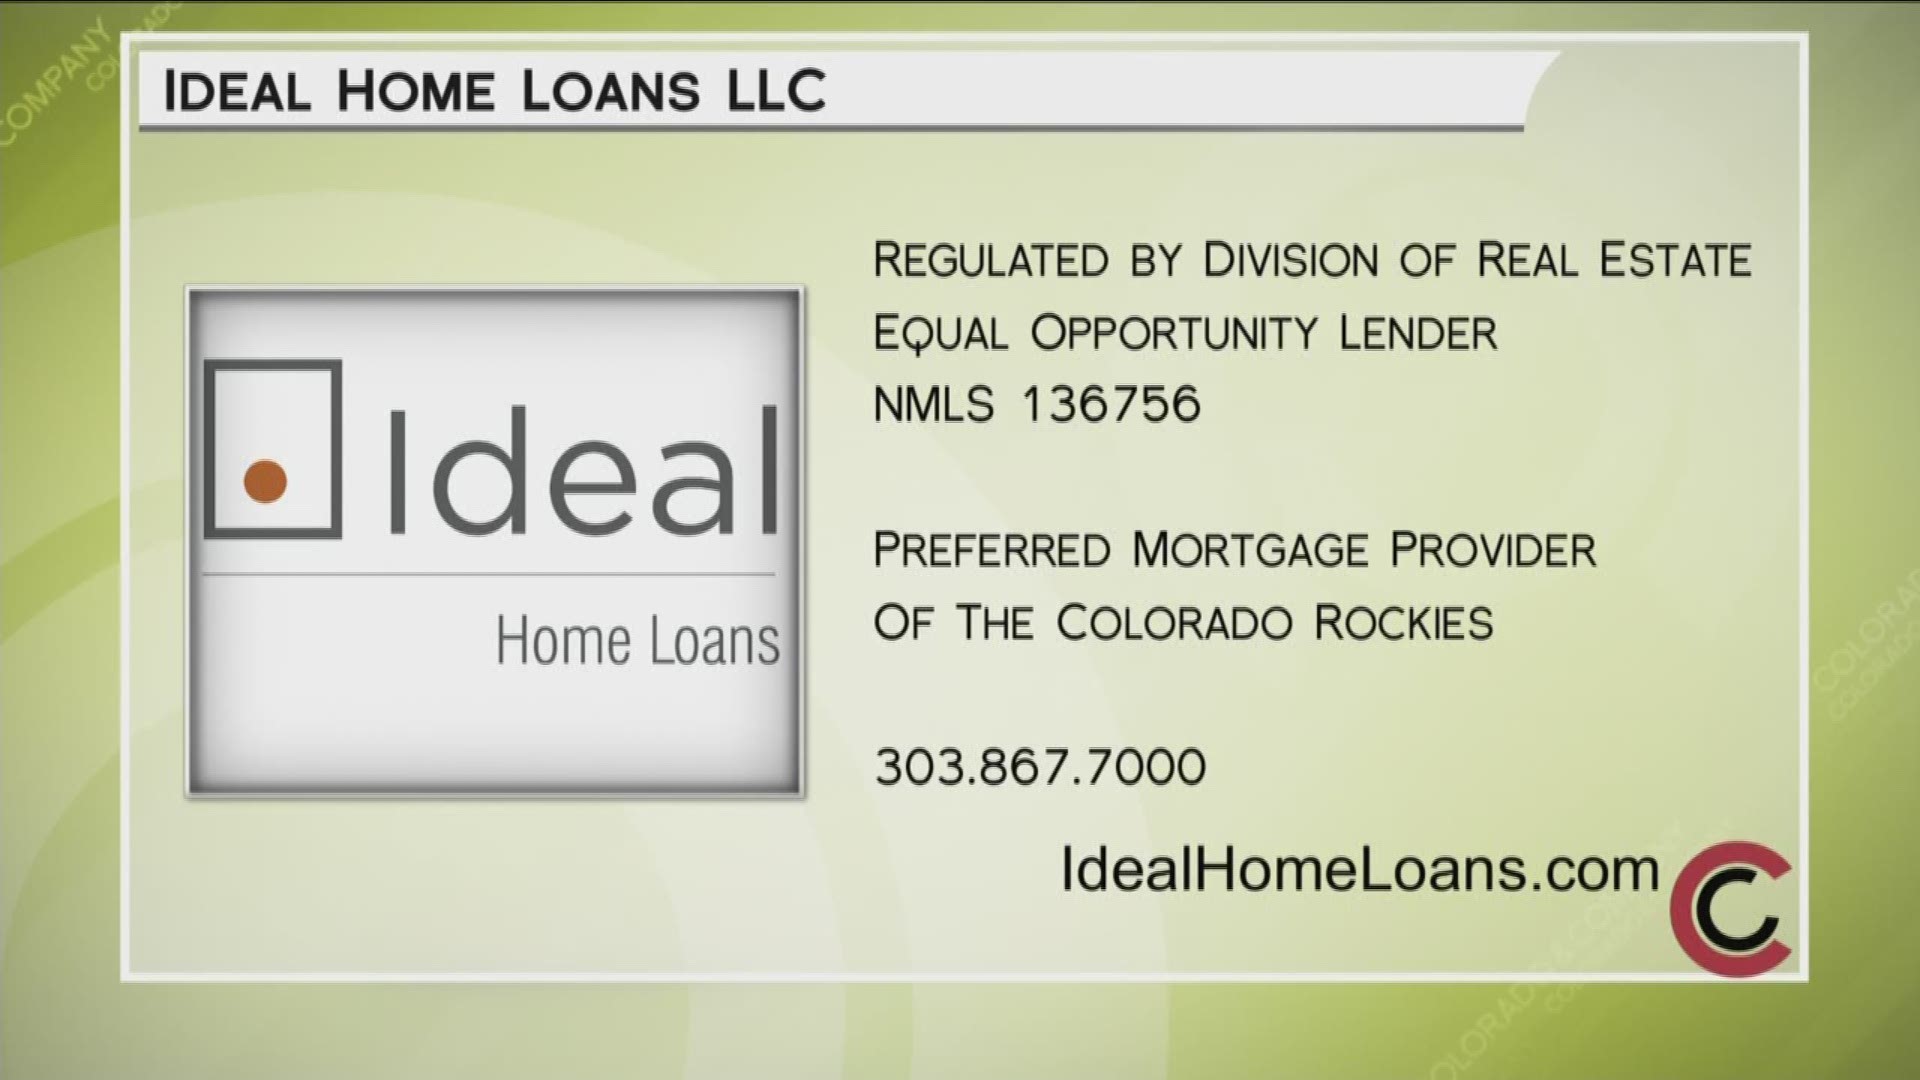 Take advantage of Ideal Home Loans’ free home mortgage consultation. Your first payment won’t be due until November! Their philosophy is “First we listen, then we lend.” Get started today by calling 303.867.7000, or online at www.IdealHomeLoans.com. 
 THIS INTERVIEW HAS COMMERCIAL CONTENT. PRODUCTS AND SERVICES FEATURED APPEAR AS PAID ADVERTISING.